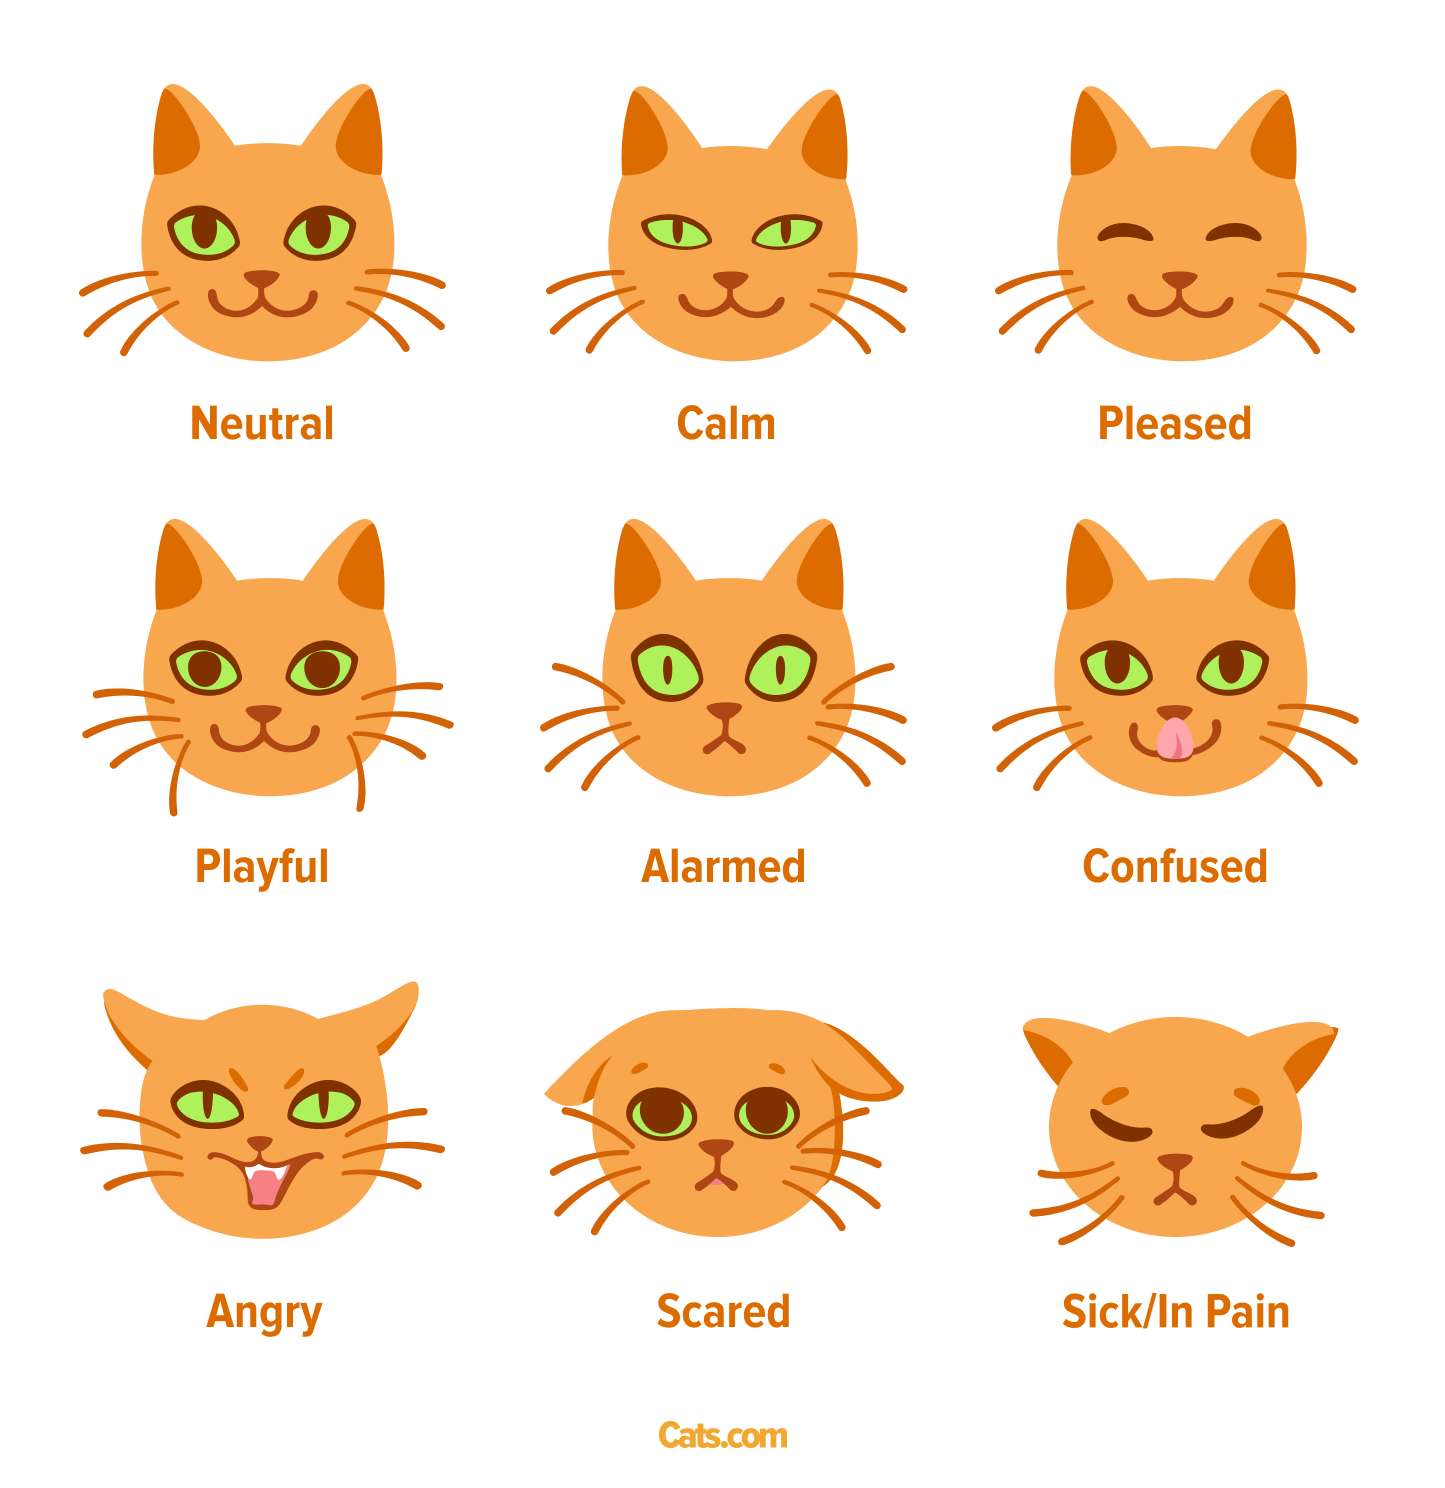 An image displaying various cat facial expressions, emphasizing the communication and emotions conveyed through feline expressions.